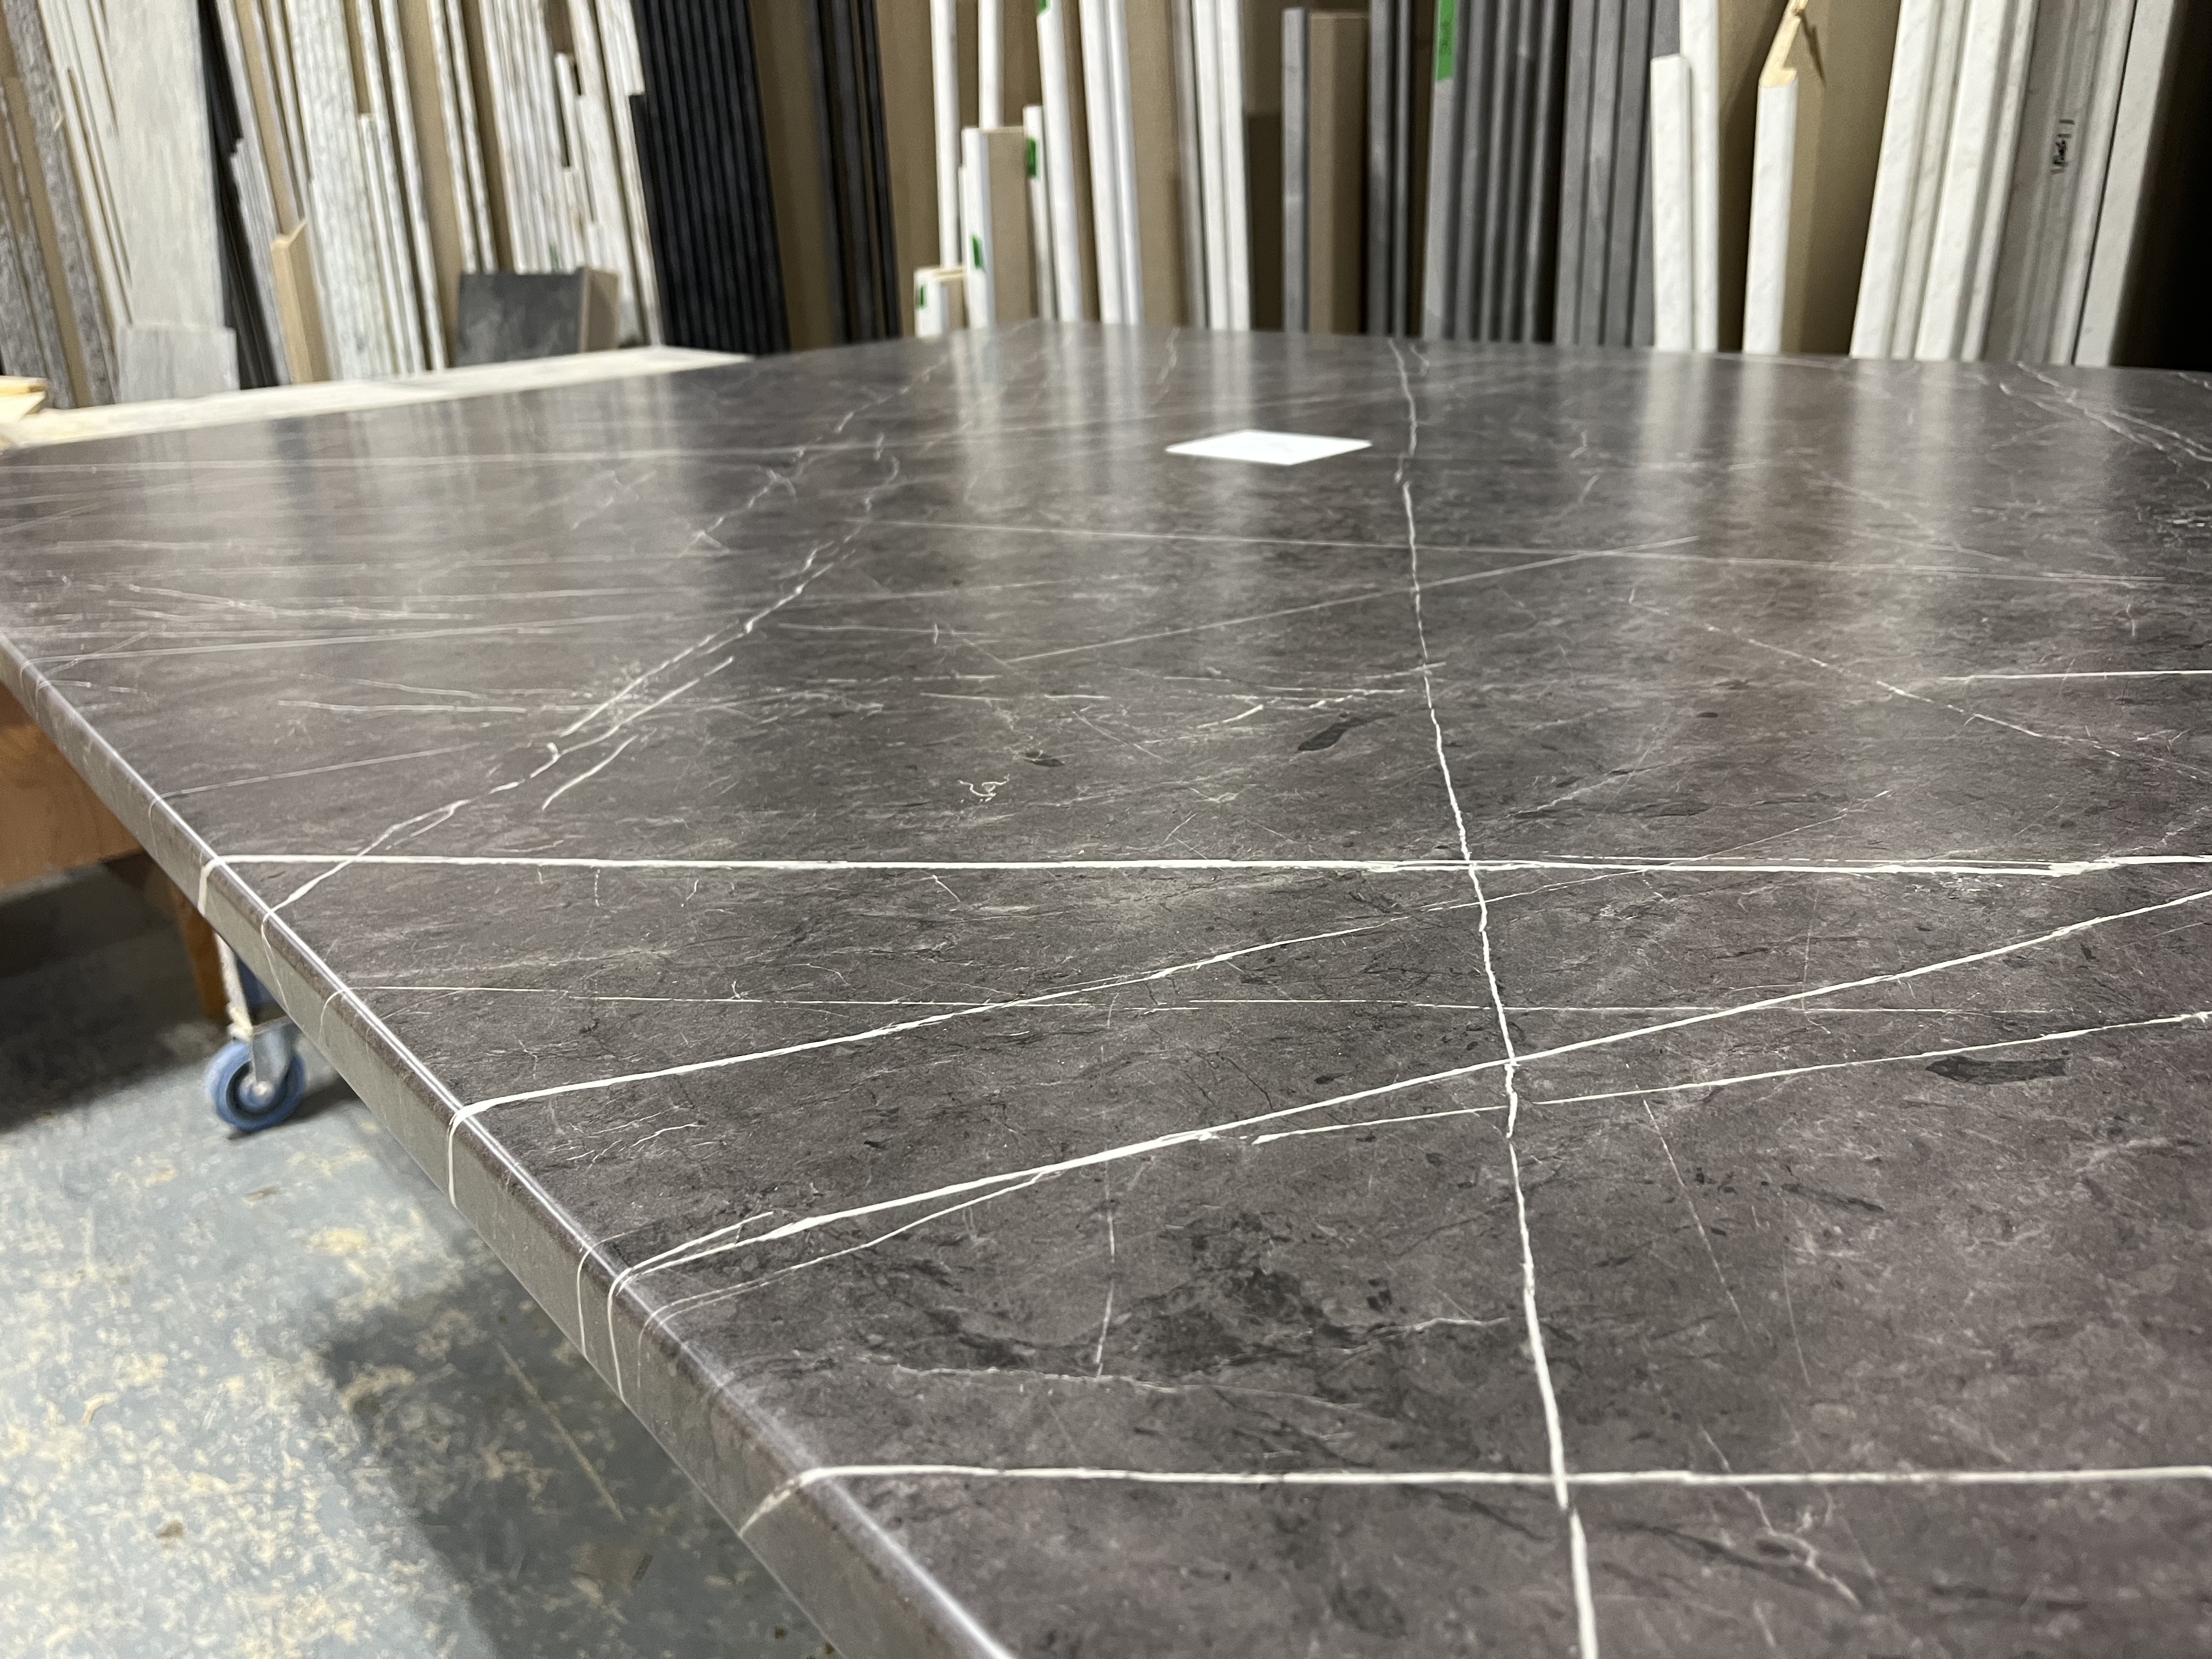 Fabricating postform laminate island in the shop, looks very much like a real soapstone